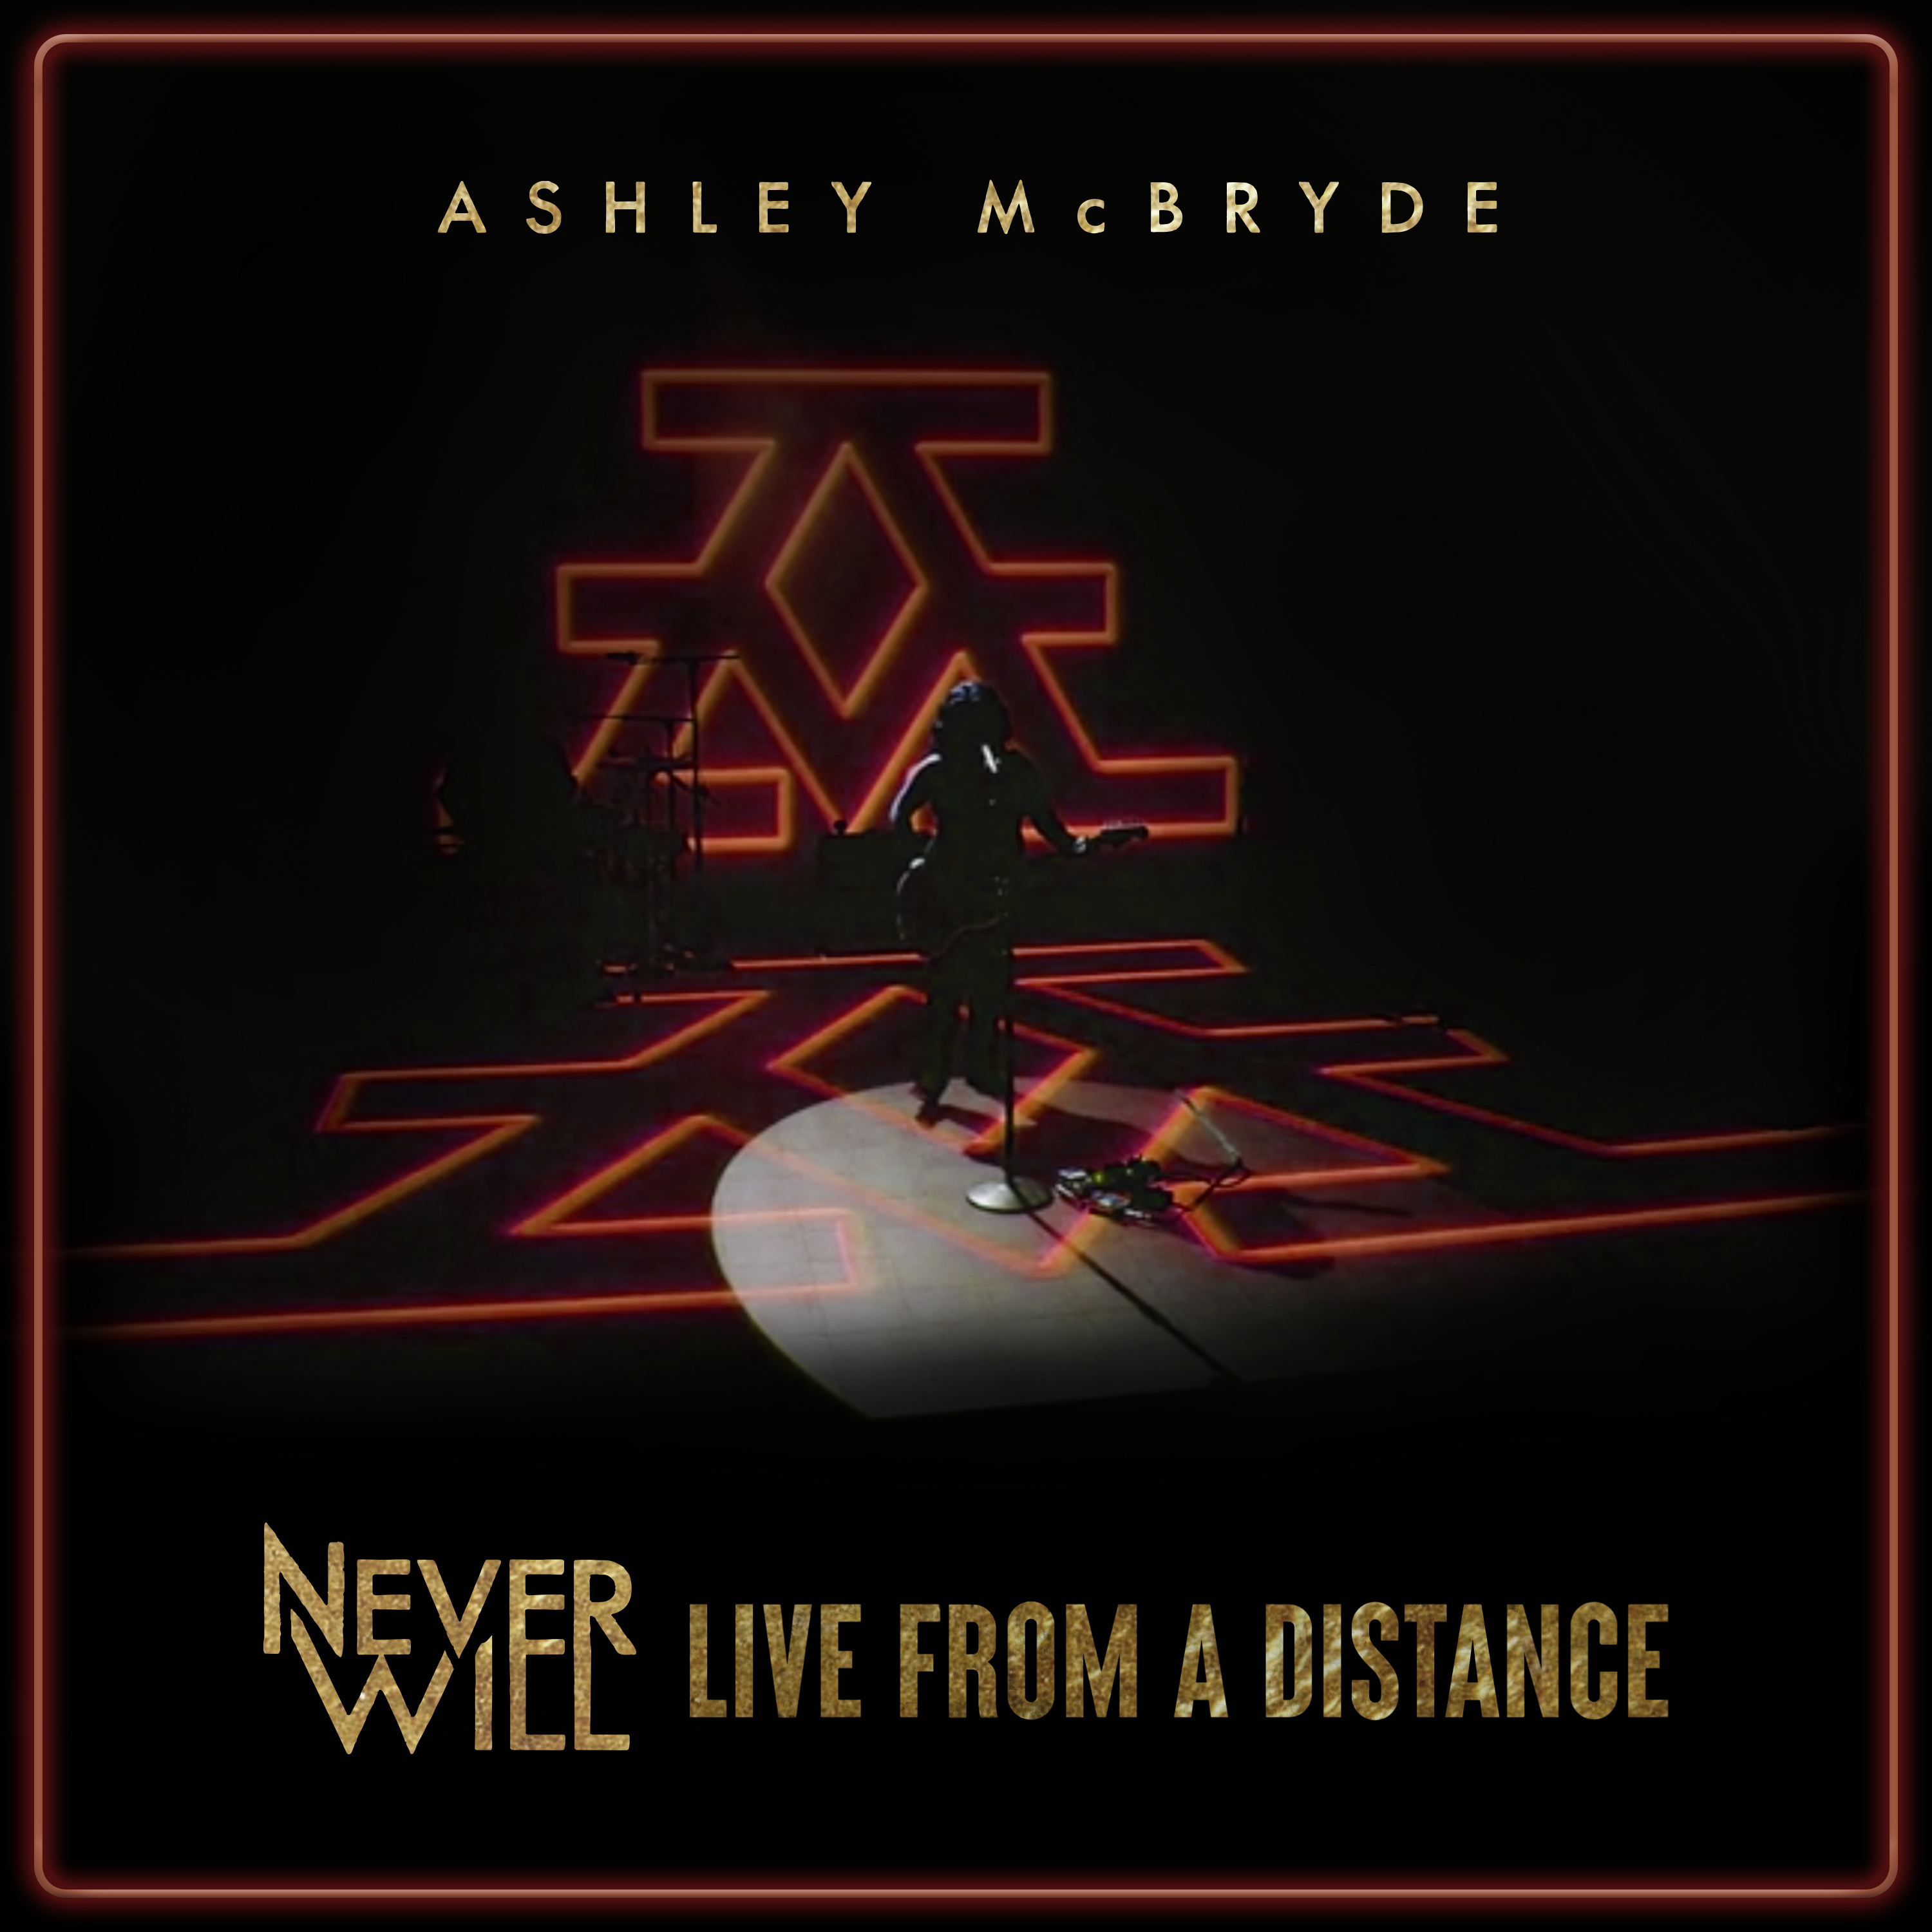 ASHLEY McBRYDE RELEASES SCORCHING LIVE VERSION OF "SHUT UP SHEILA" FROM "NEVER WILL: LIVE FROM A DISTANCE"